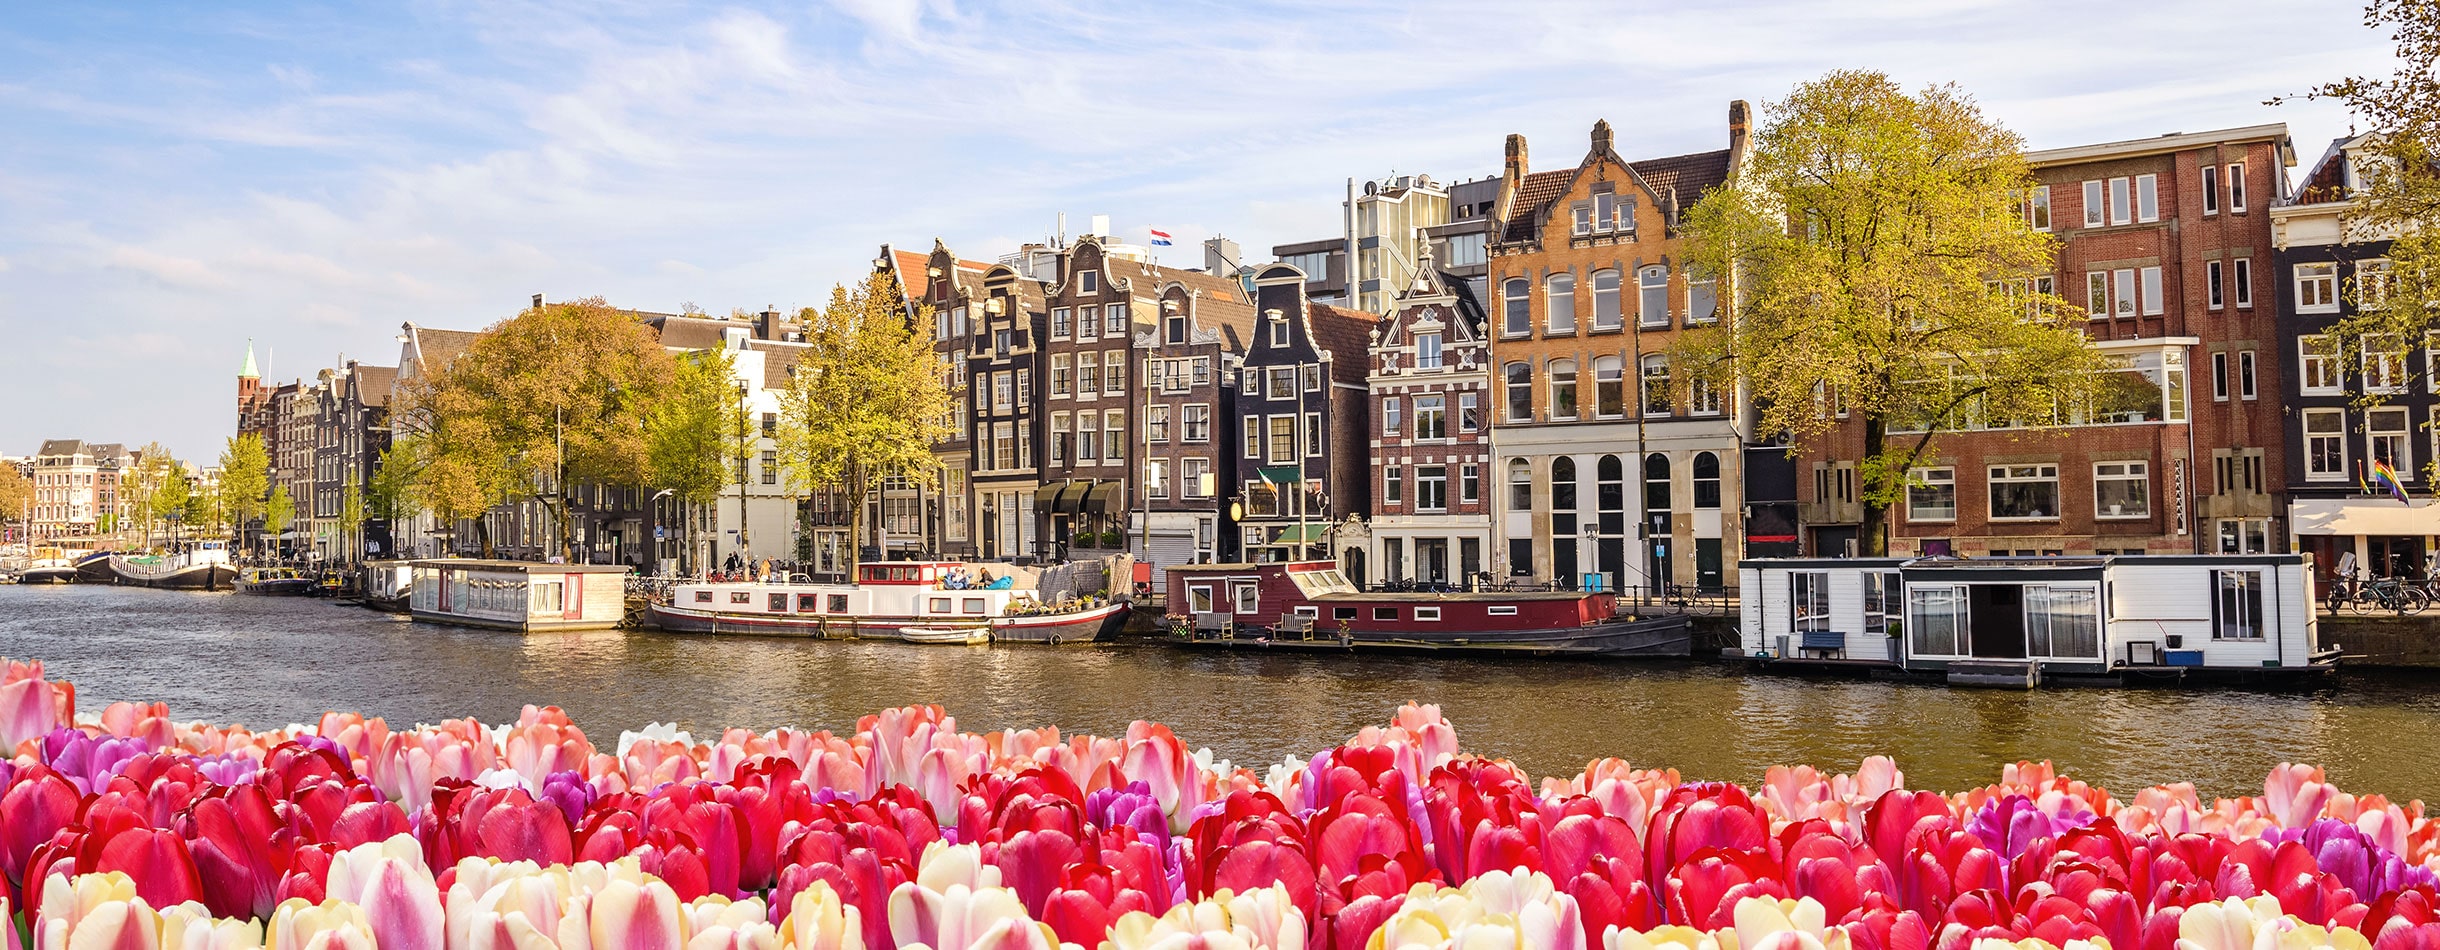 Amsterdam Canal with tulips in the foreground